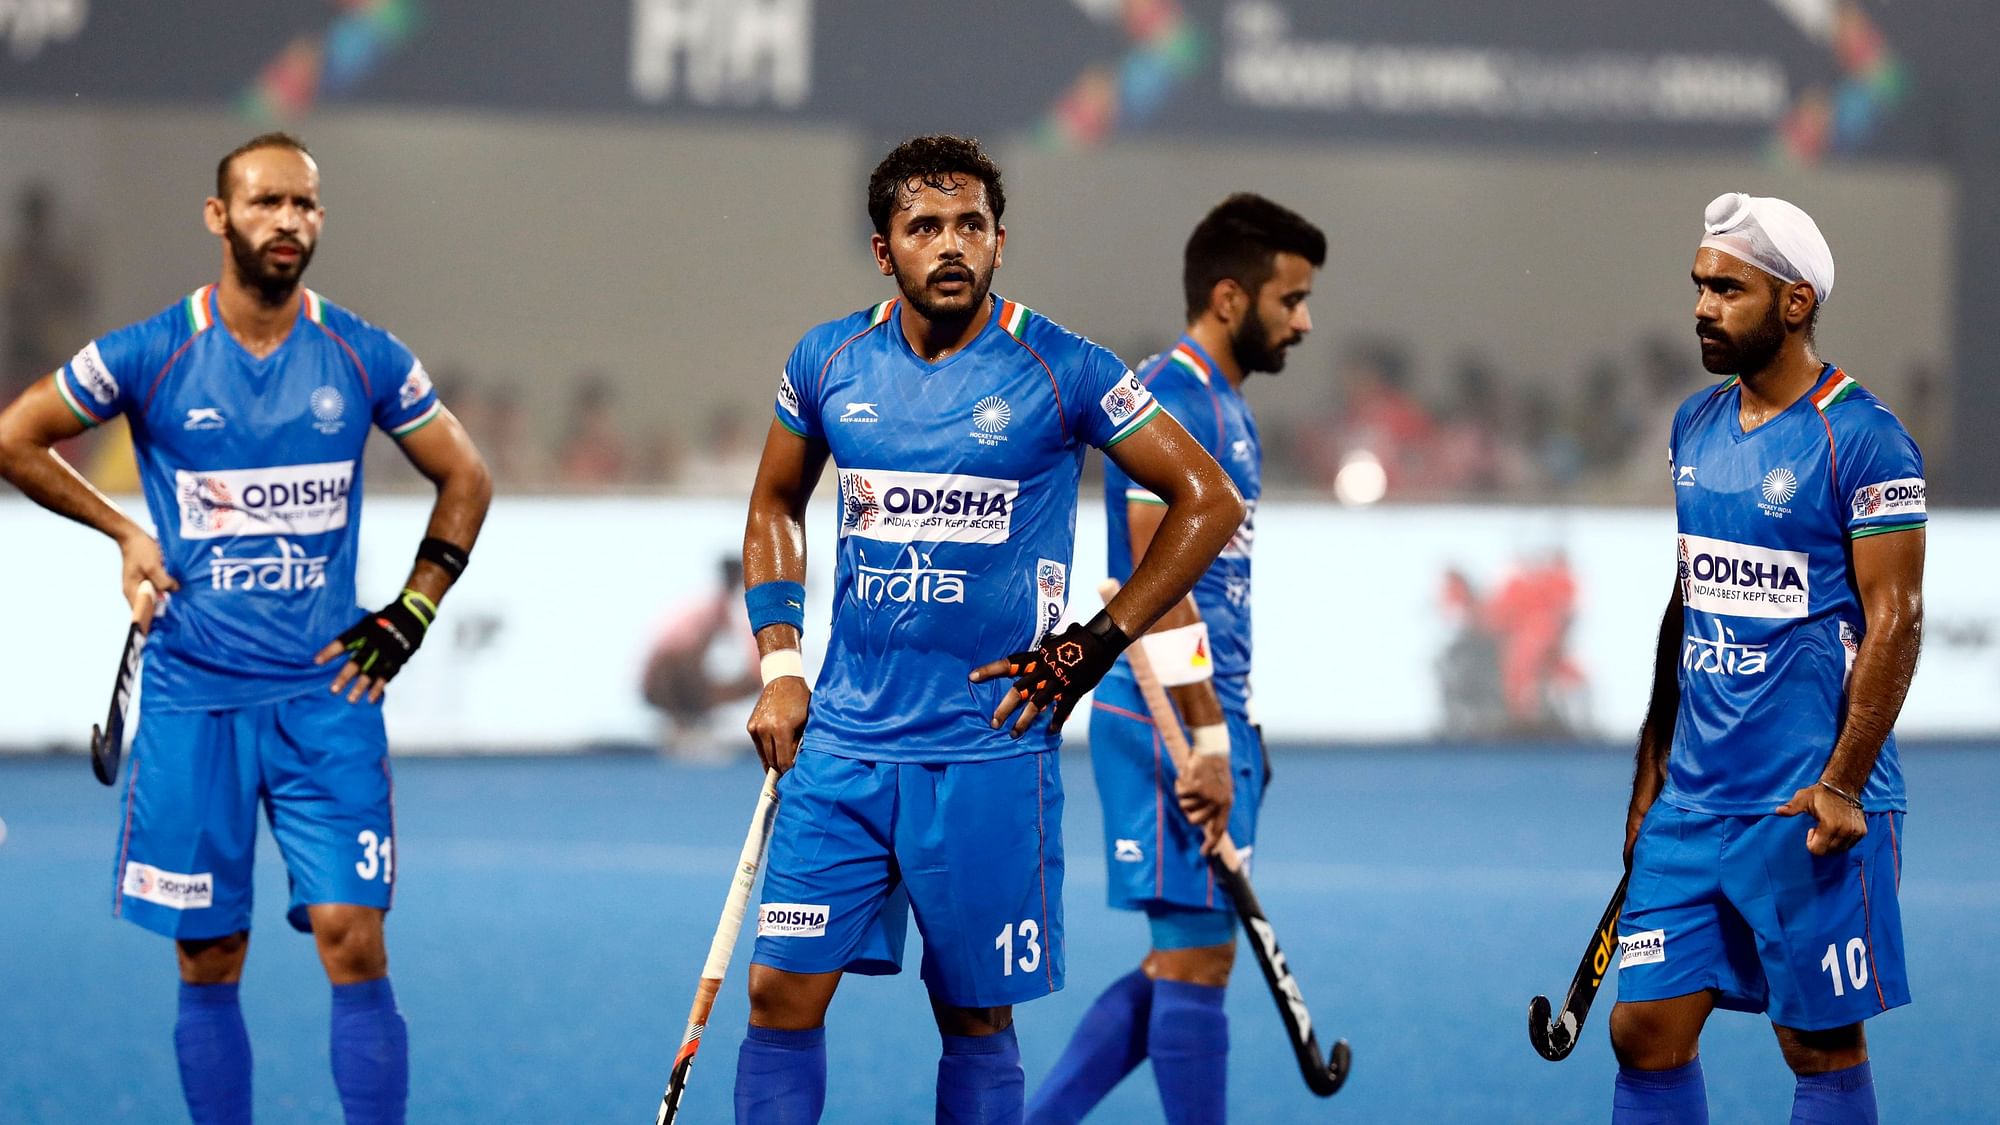 Mandeep Singh struck twice as India beat minnows Russia 4-2 in the first-leg of the two-match hockey Olympic Qualifier on Friday.